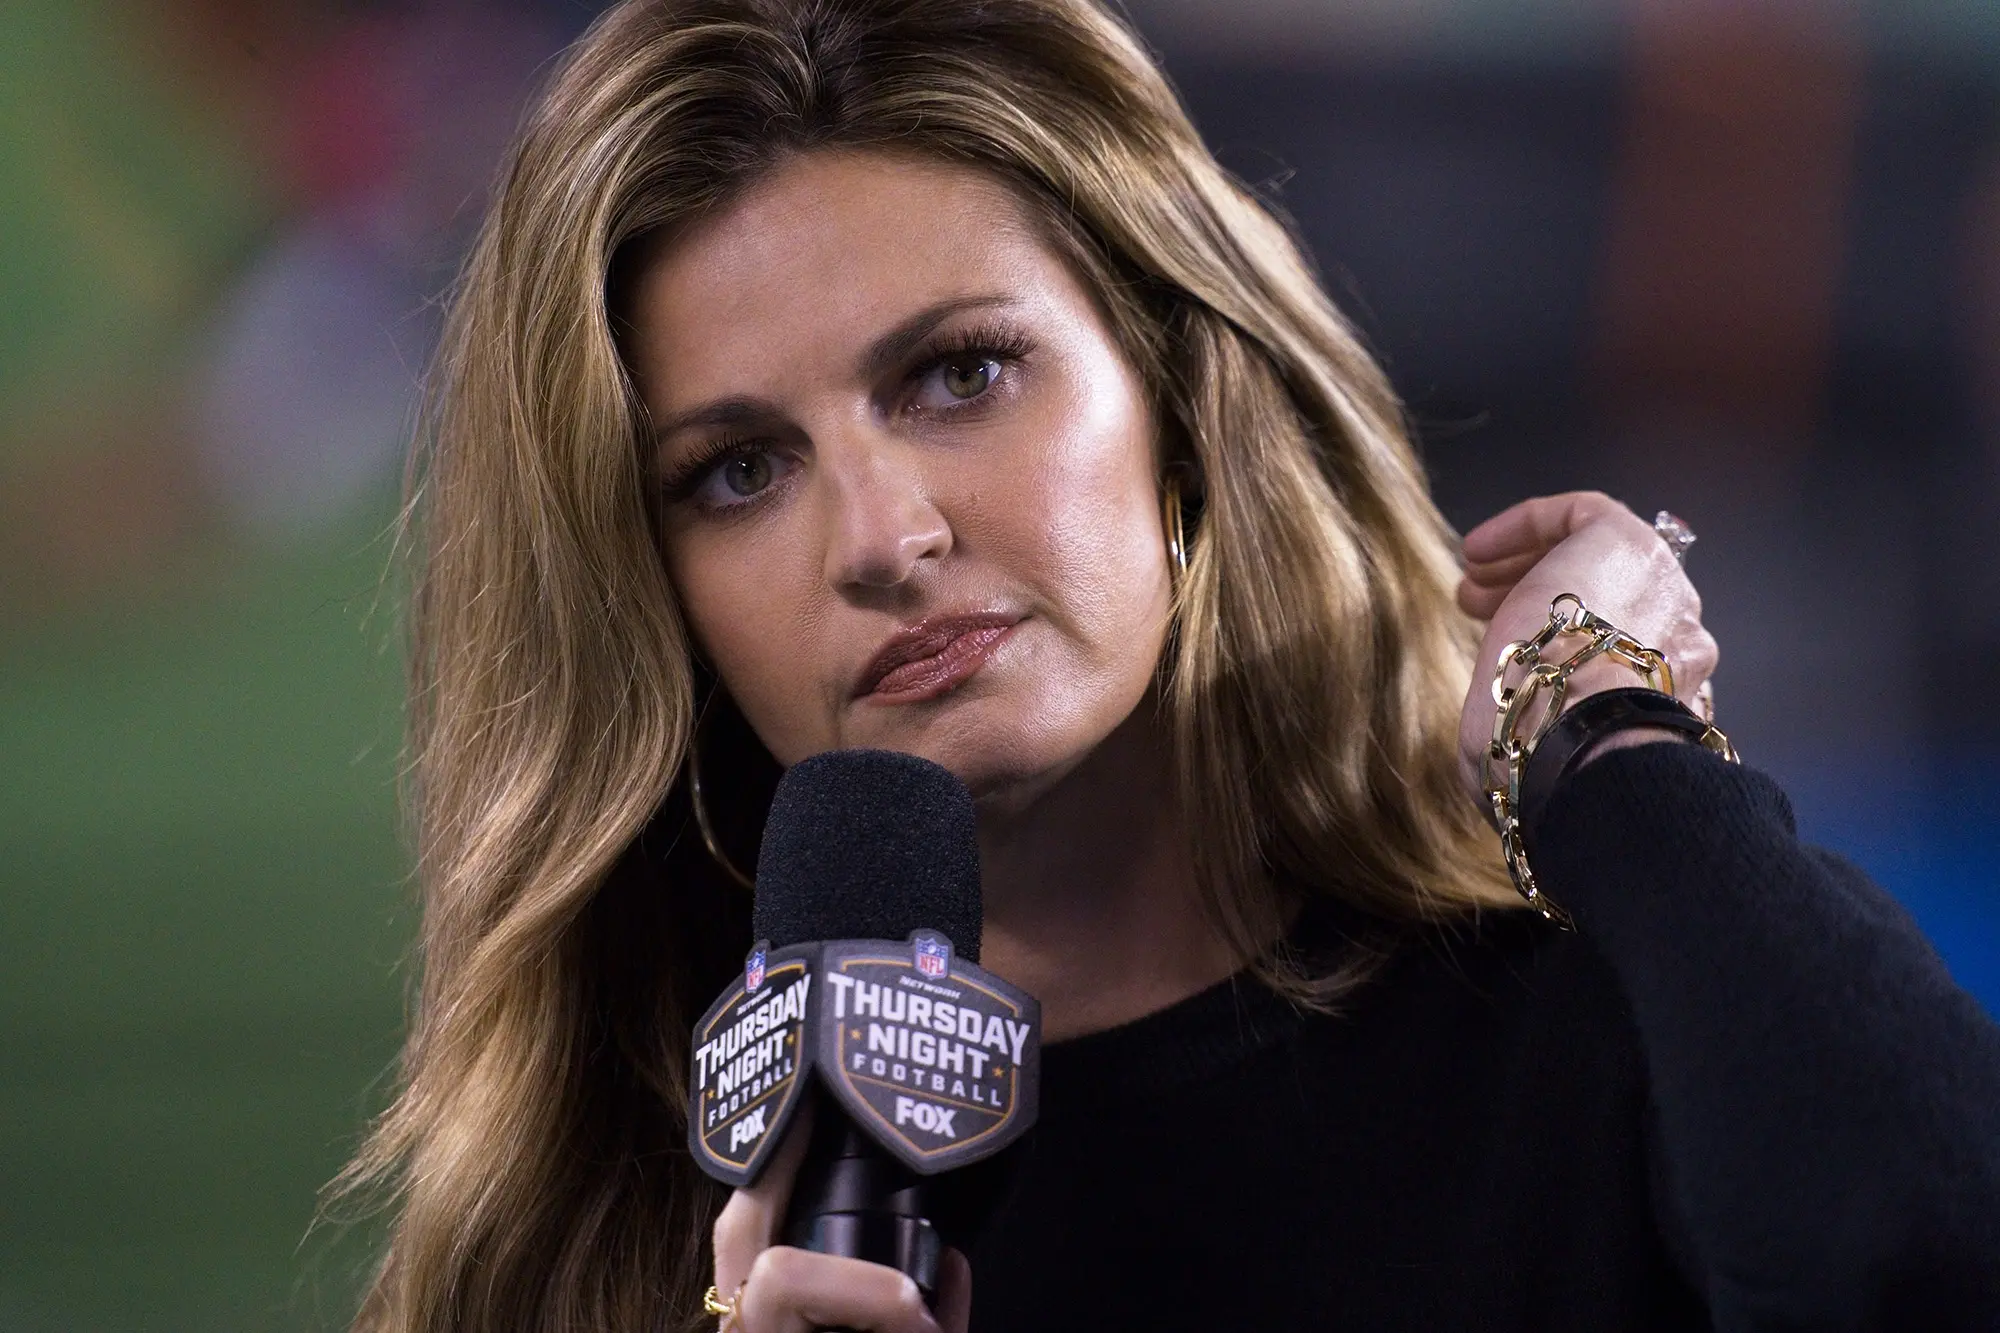 Who Is Erin Andrews?